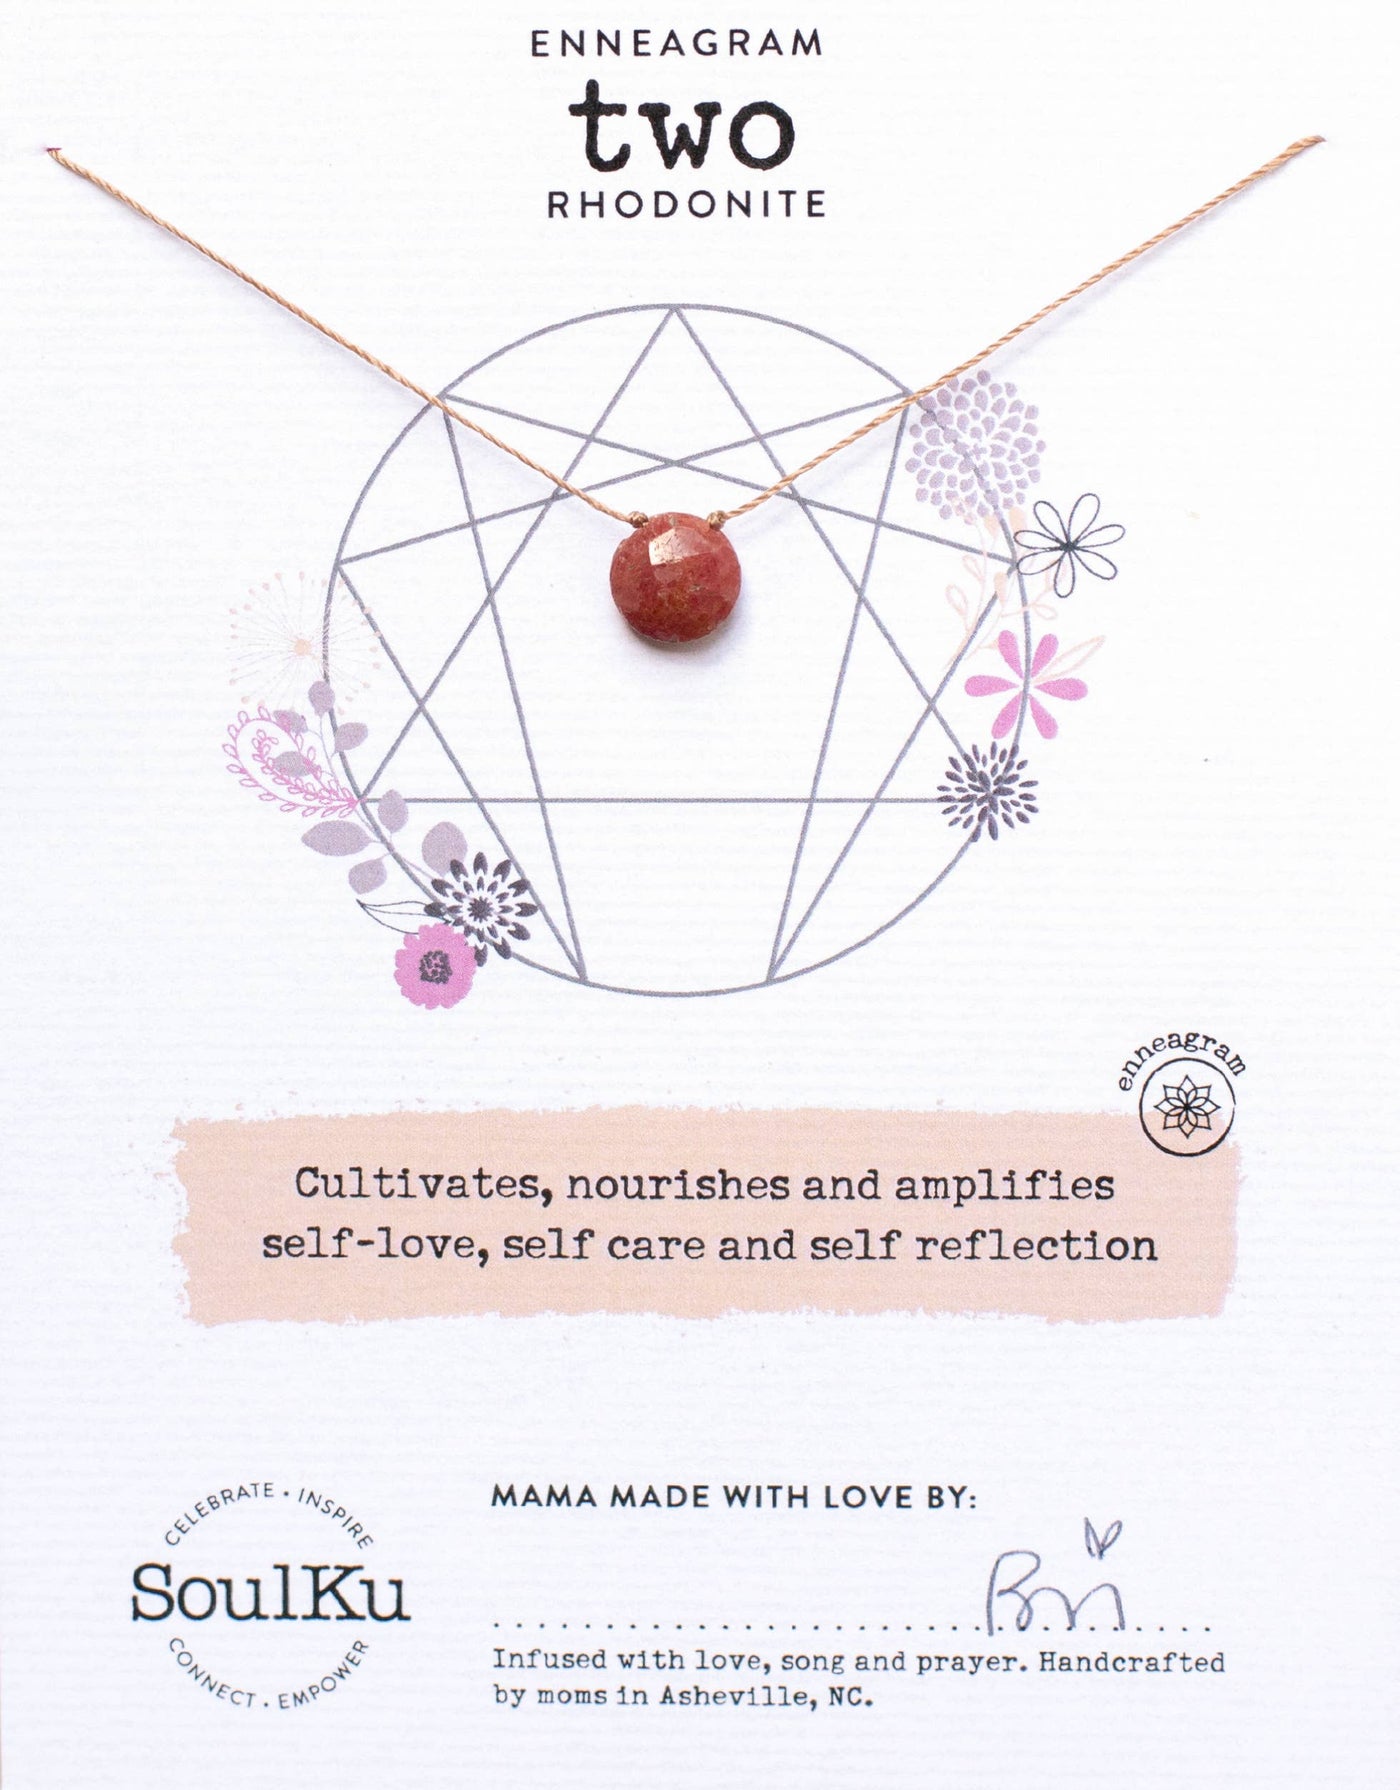 RHODONITE ENNEAGRAM TYPE TWO NECKLACE "THE GIVER"